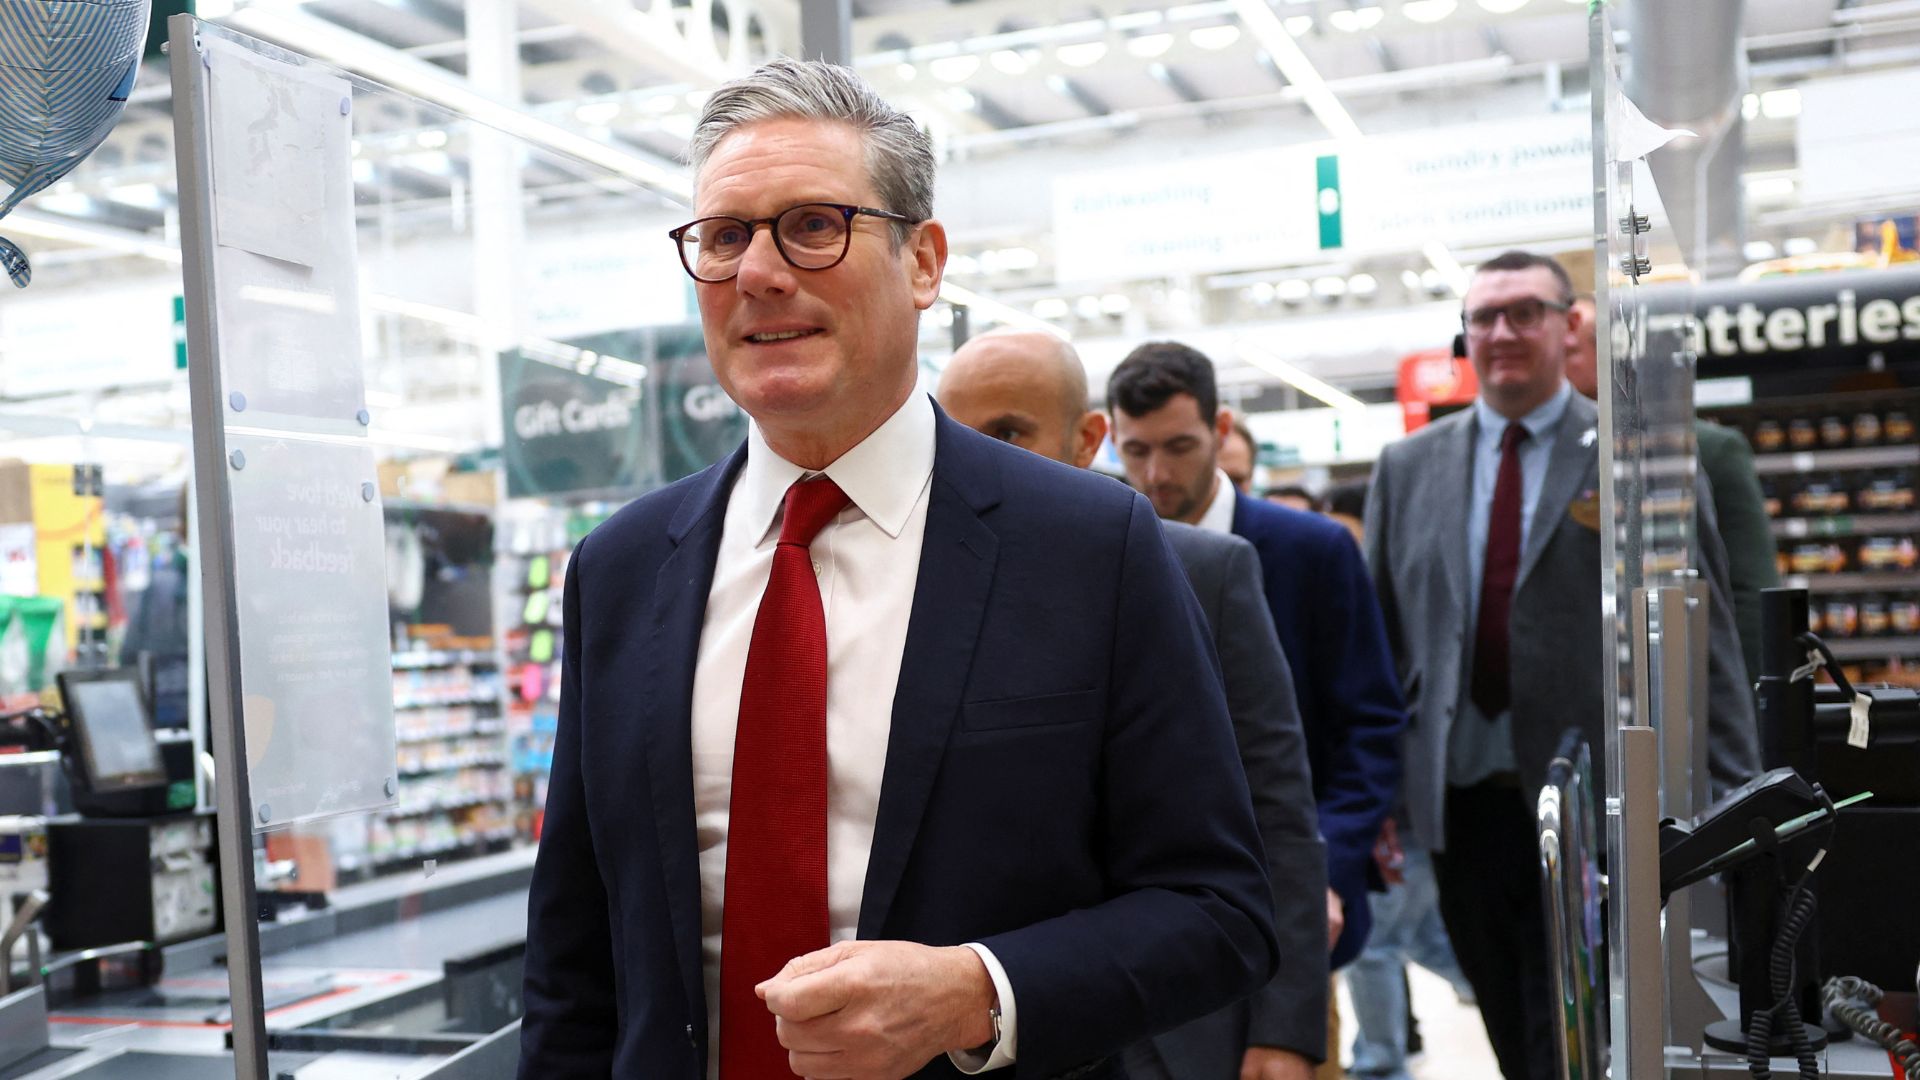 British opposition Labour Party leader Keir Starmer takes a tour around a Morrisons supermarket during a campaign event. /Hannah McKay/Reuters